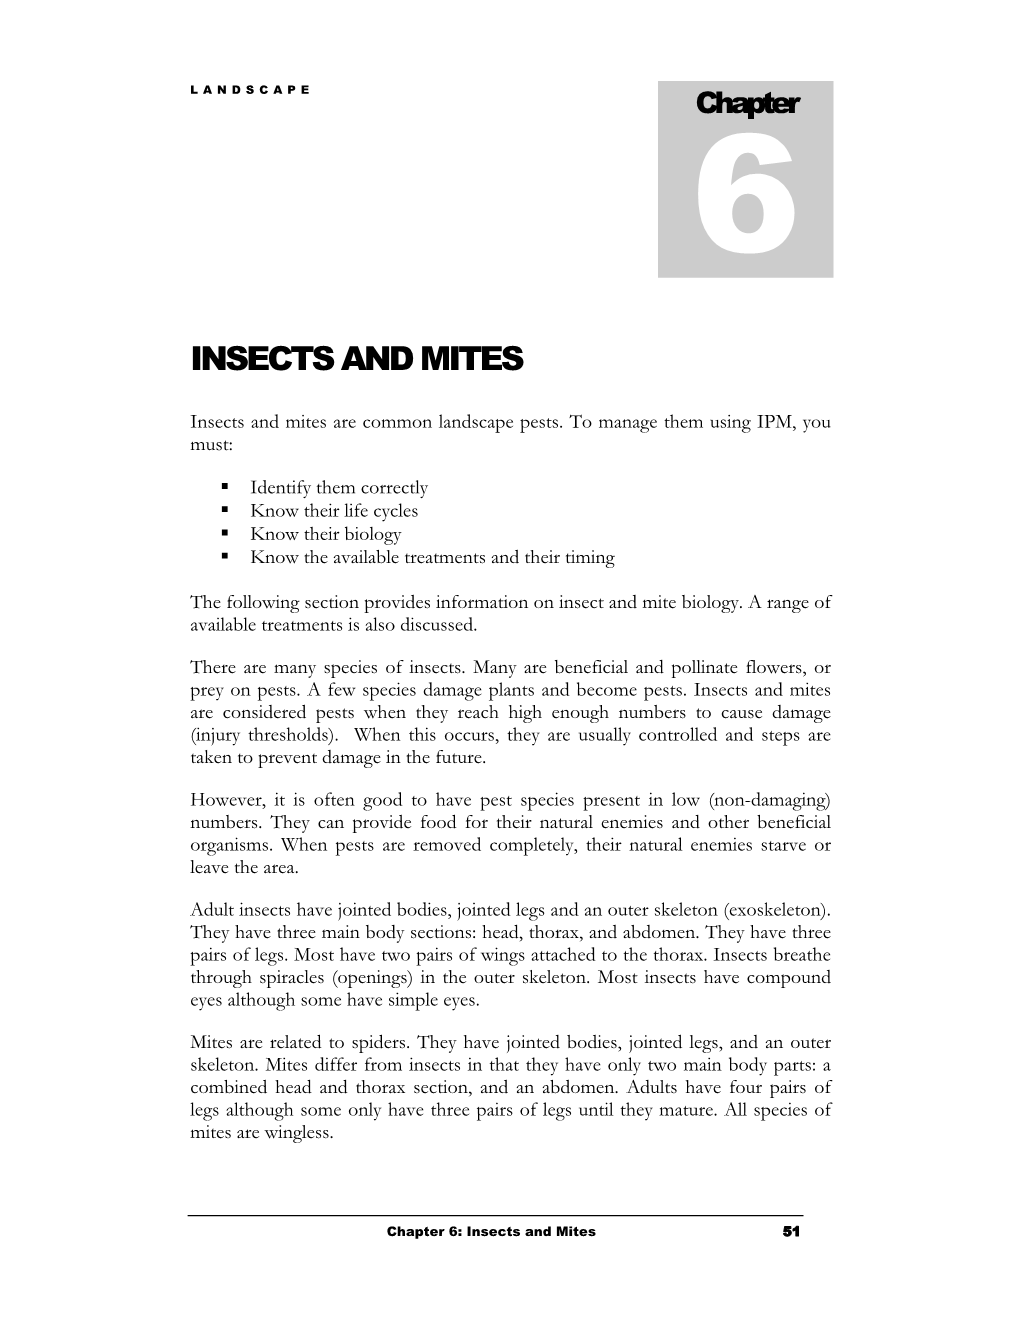 Chapter 6: Insects and Mites 51 LANDSCAPE